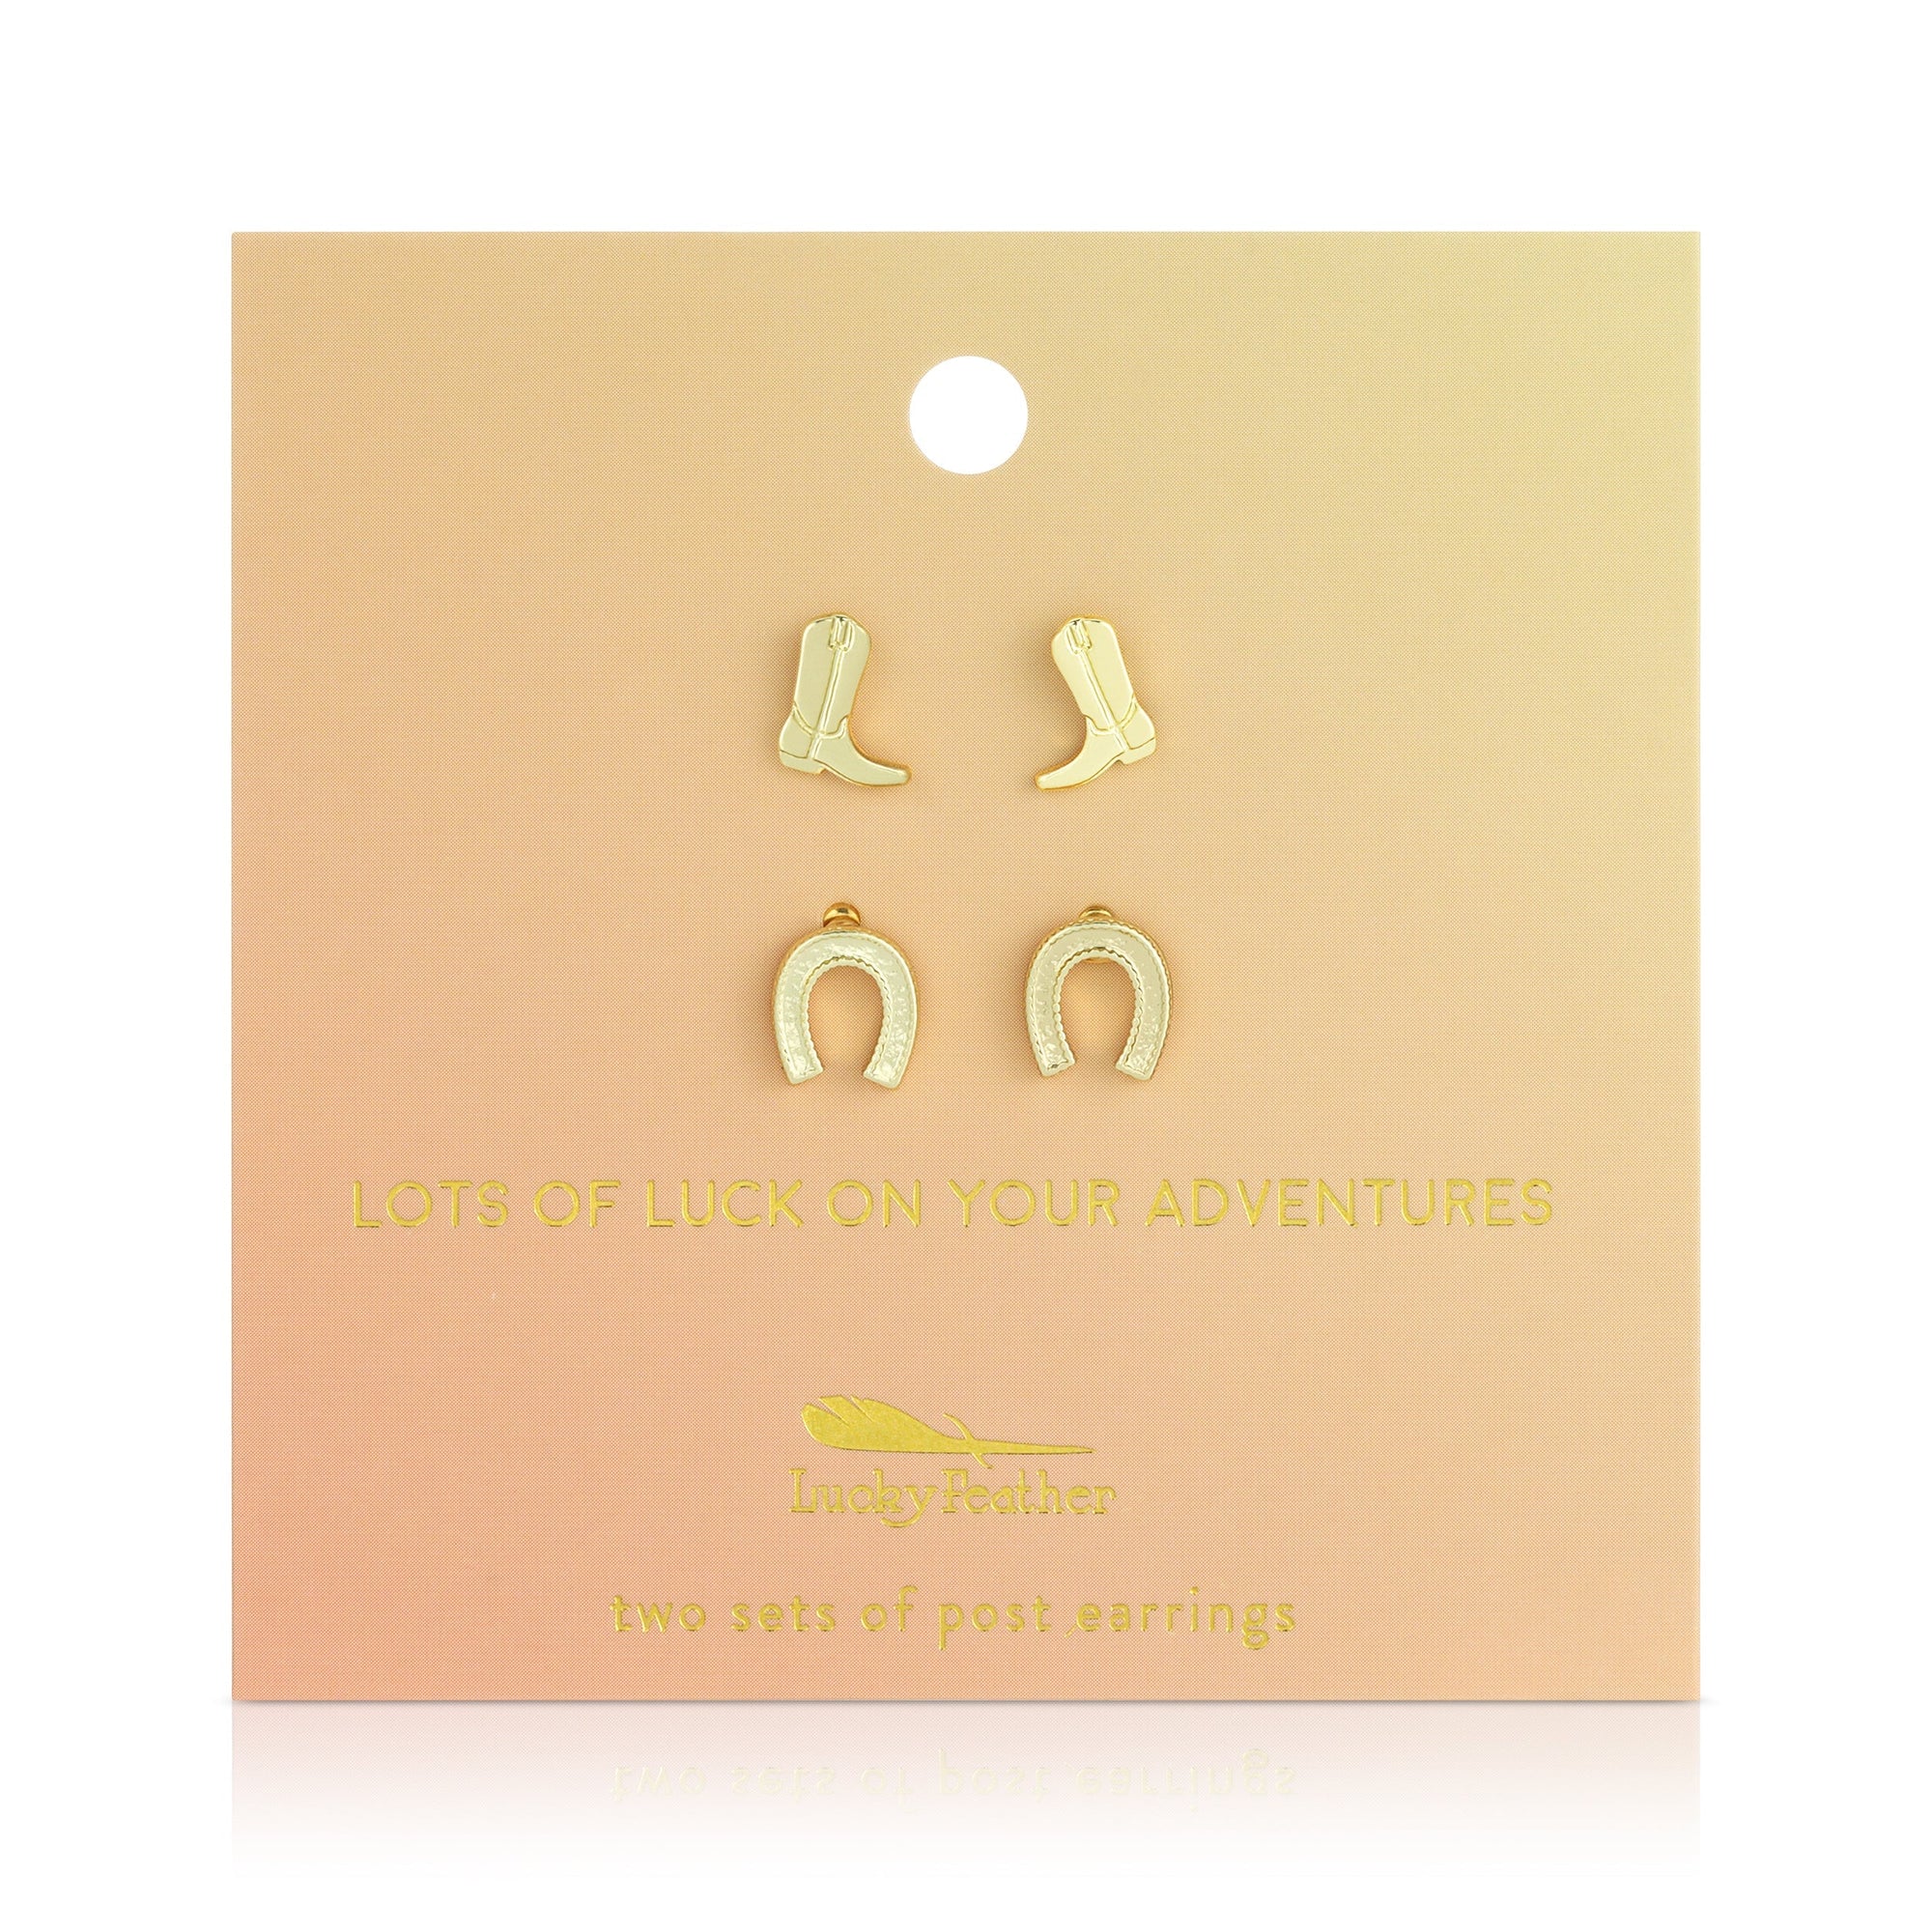 Lots of Luck - Boots + Horseshoe Studs by Lucky Feather